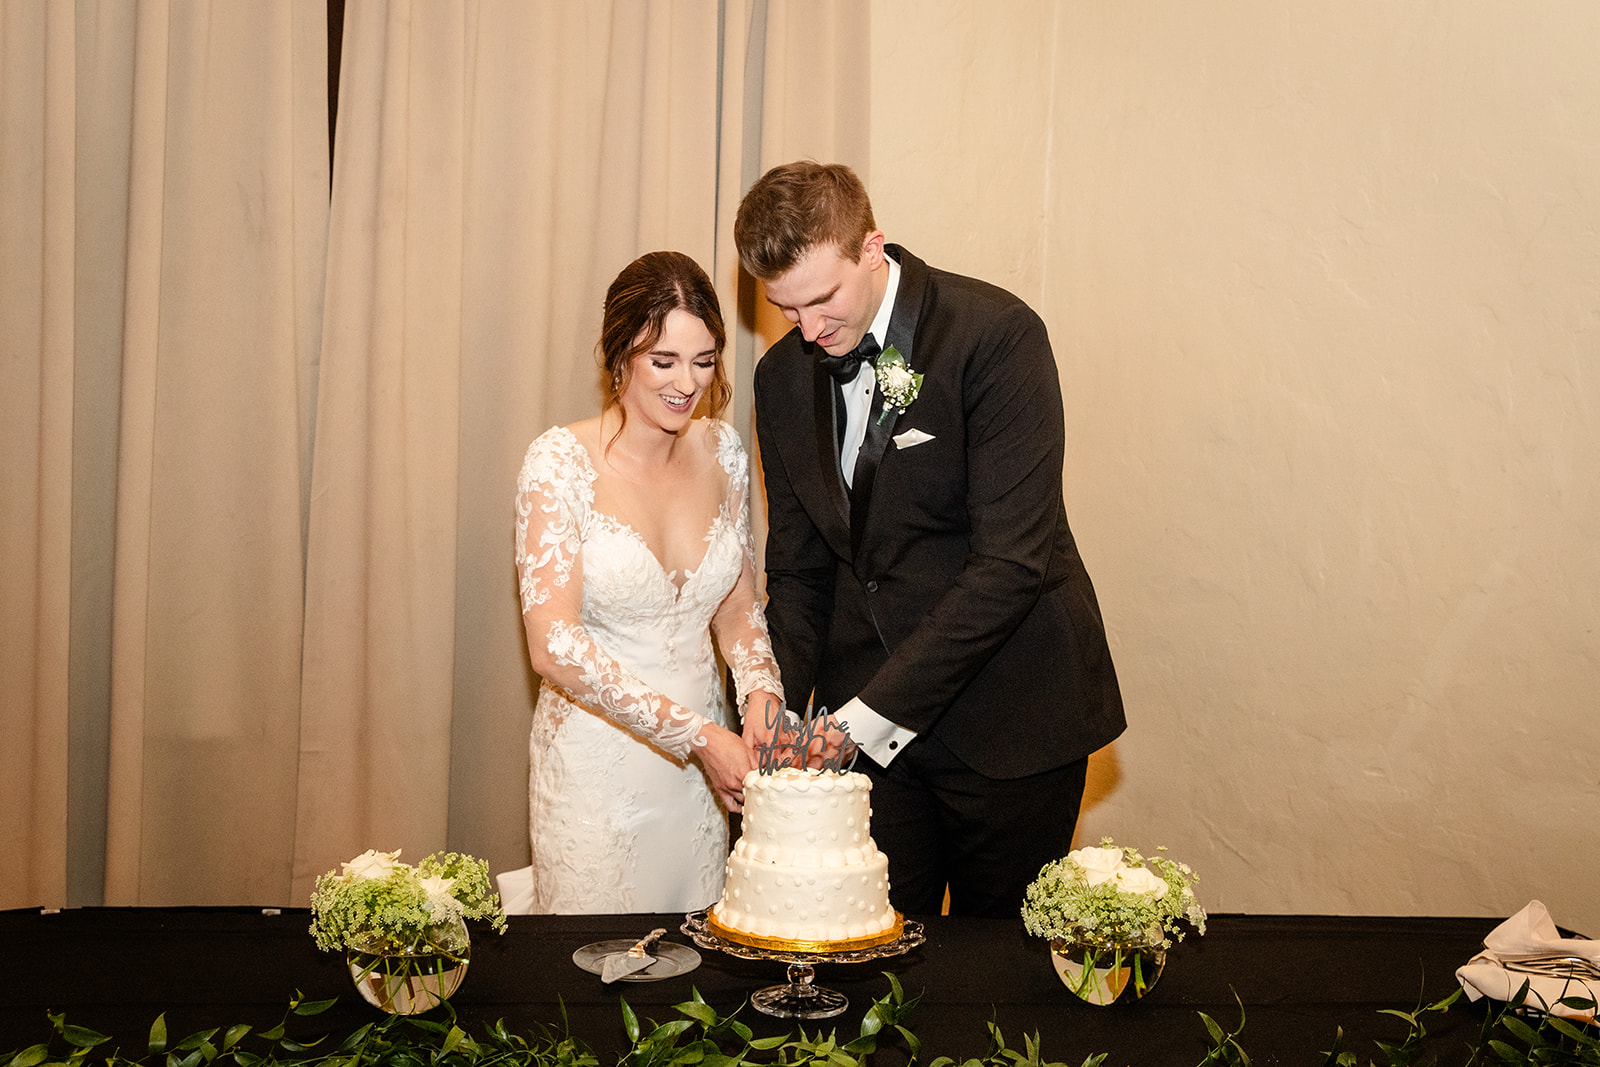 Cake cutting at Hillcrest Country Club